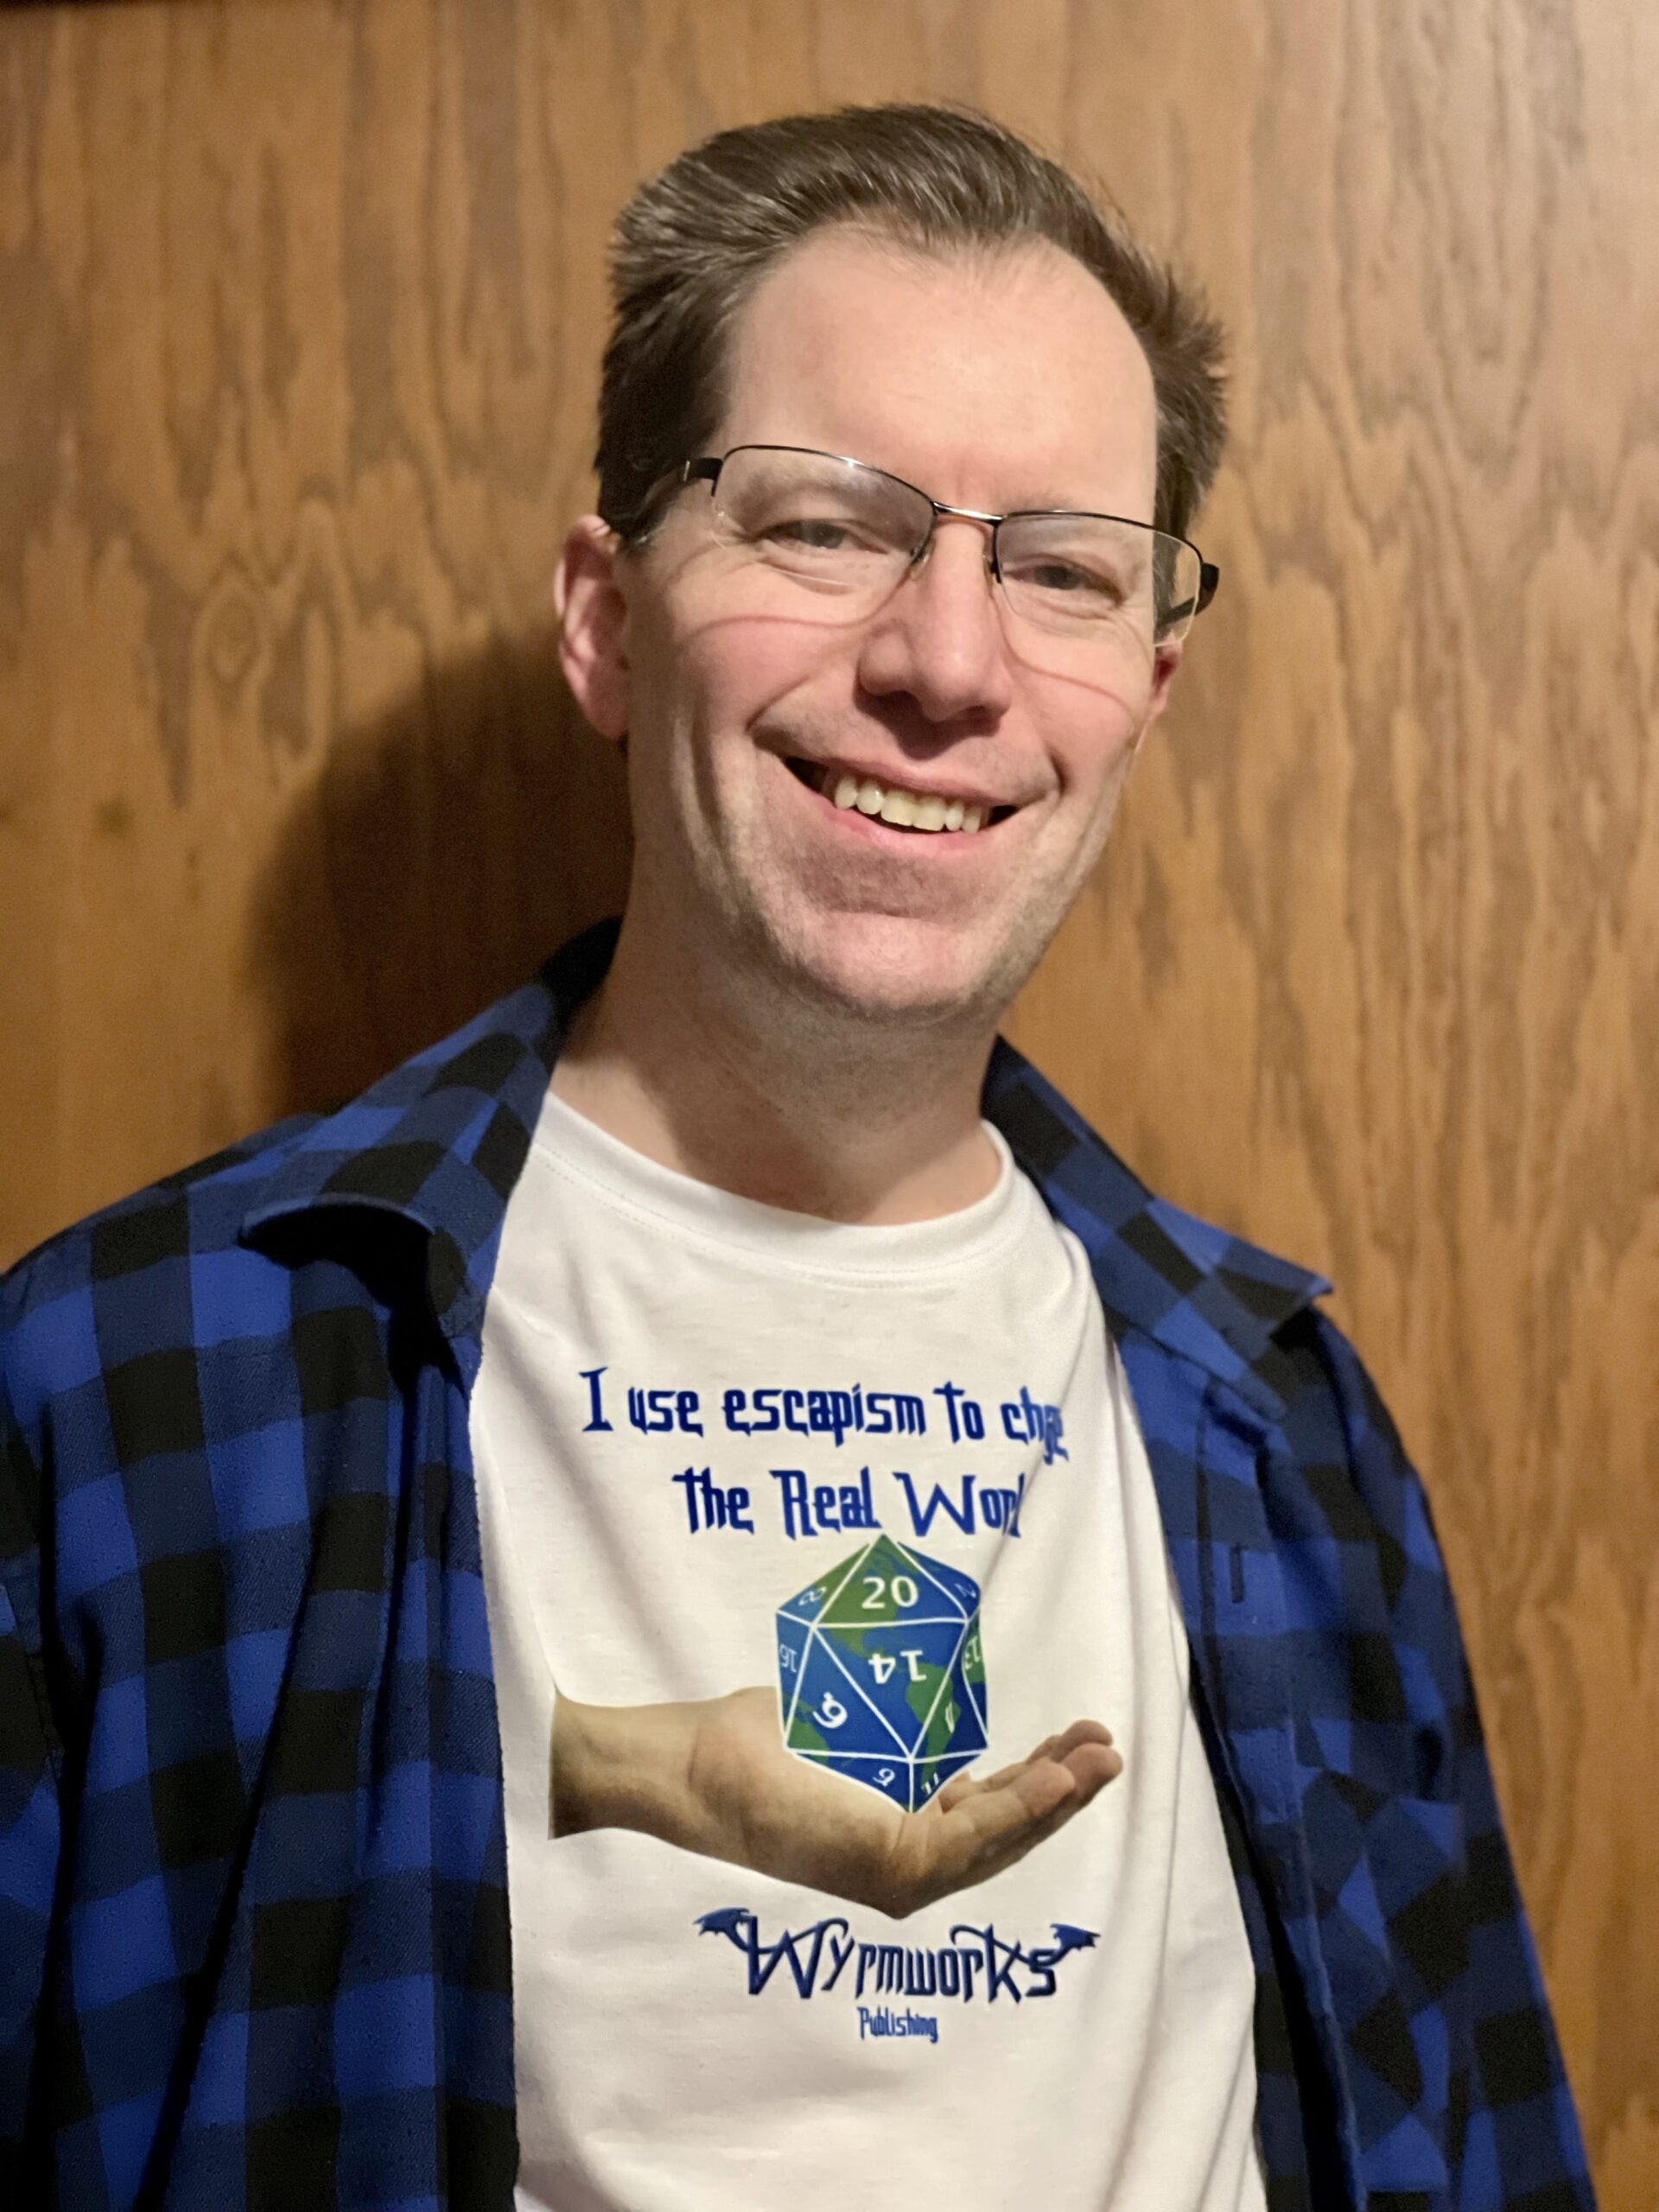 Dale Critchley, a middle-aged white man with short blond hair, wearing a blue plaid flannel shirt with a white t-shirt beneath with a hand holding a D20 globe. Above the globe, "I user escapism to change the real world," and below, the Wyrmworks Publishing logo, standing if front of a wooden door